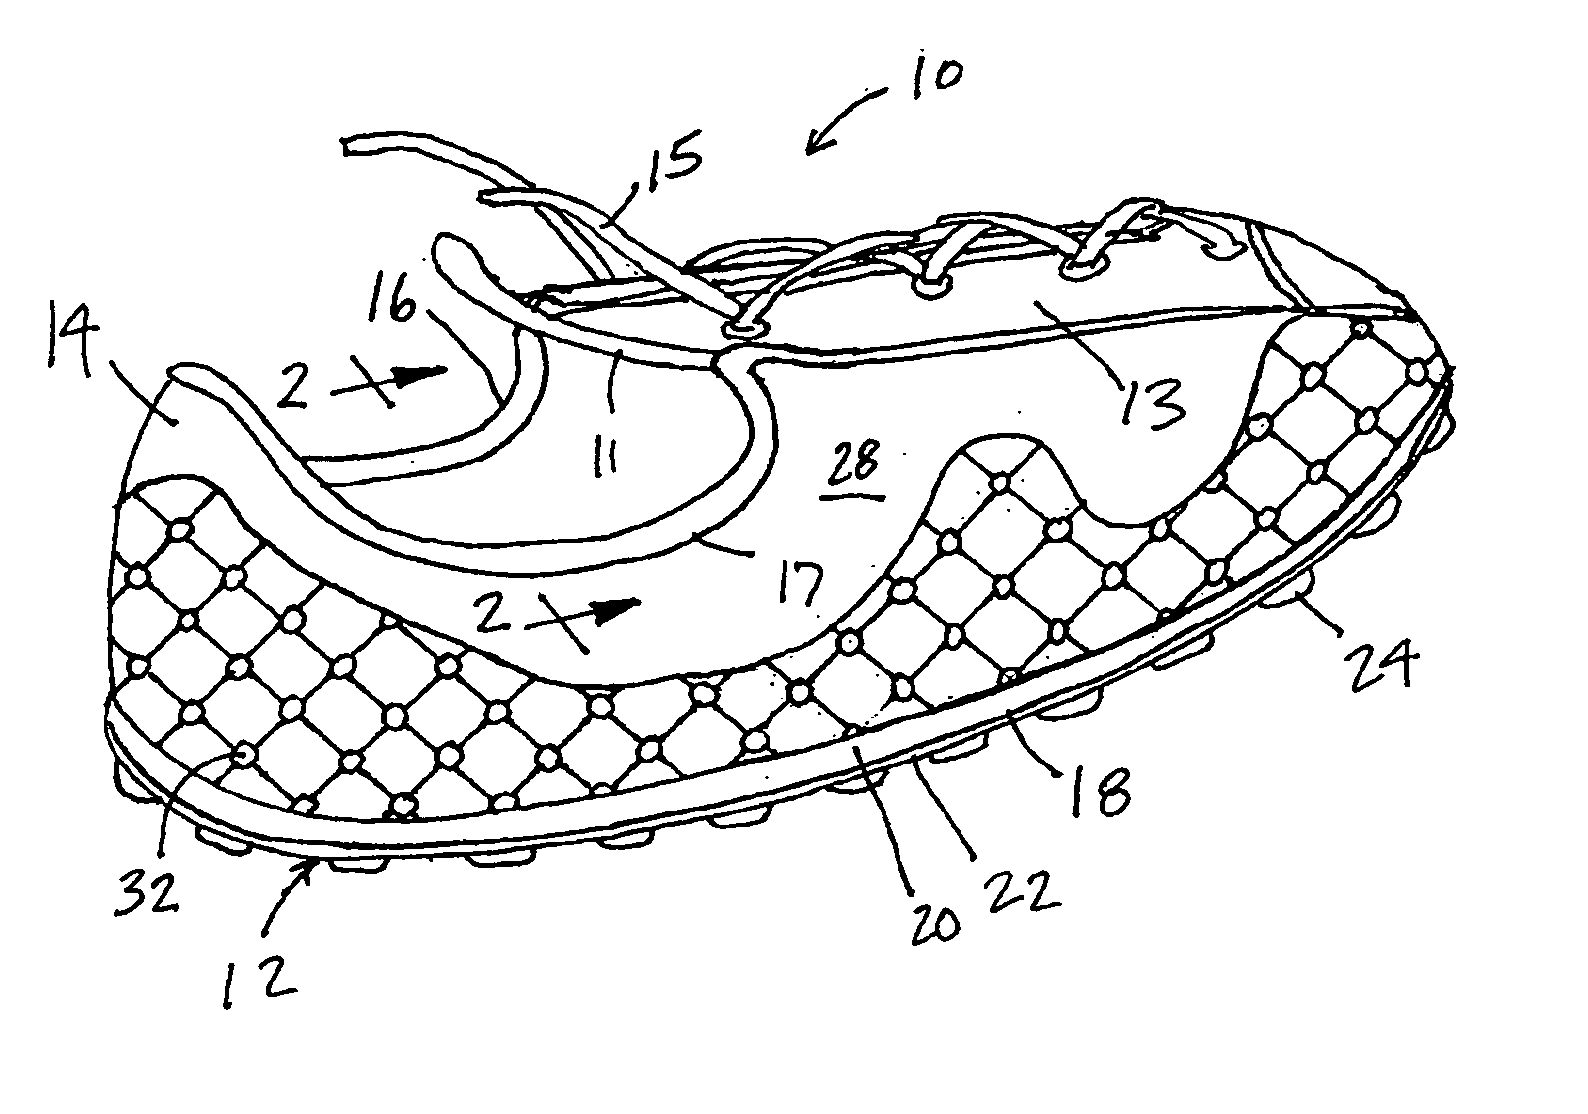 Article of footwear with variable support structure